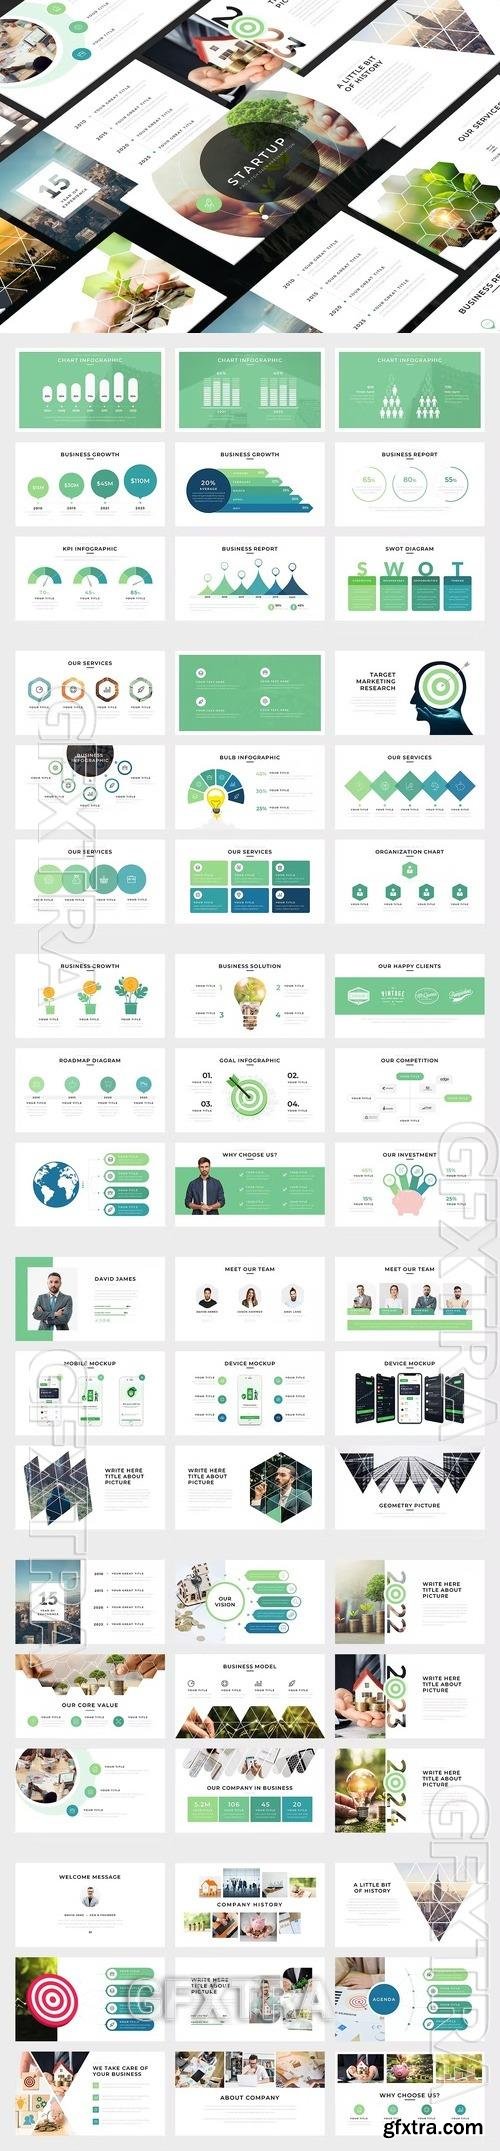 Startup - Pro Pitch Deck Powerpoint Template YHWM52L